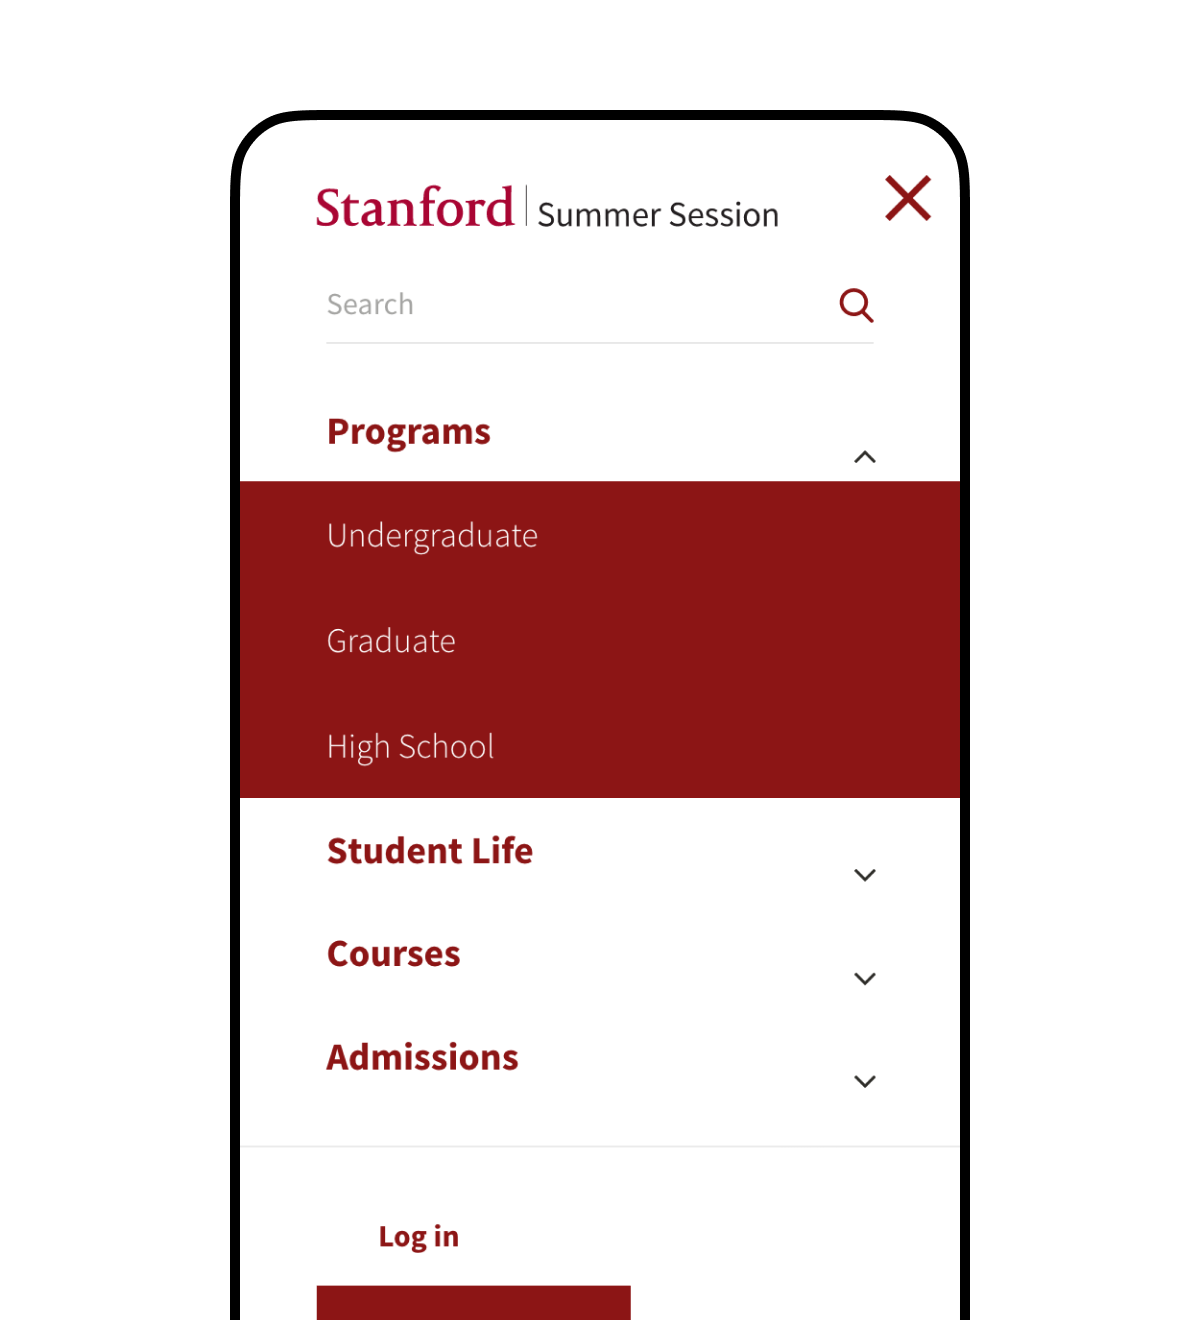 A screenshot of the Stanford Summer Session mobile navigation